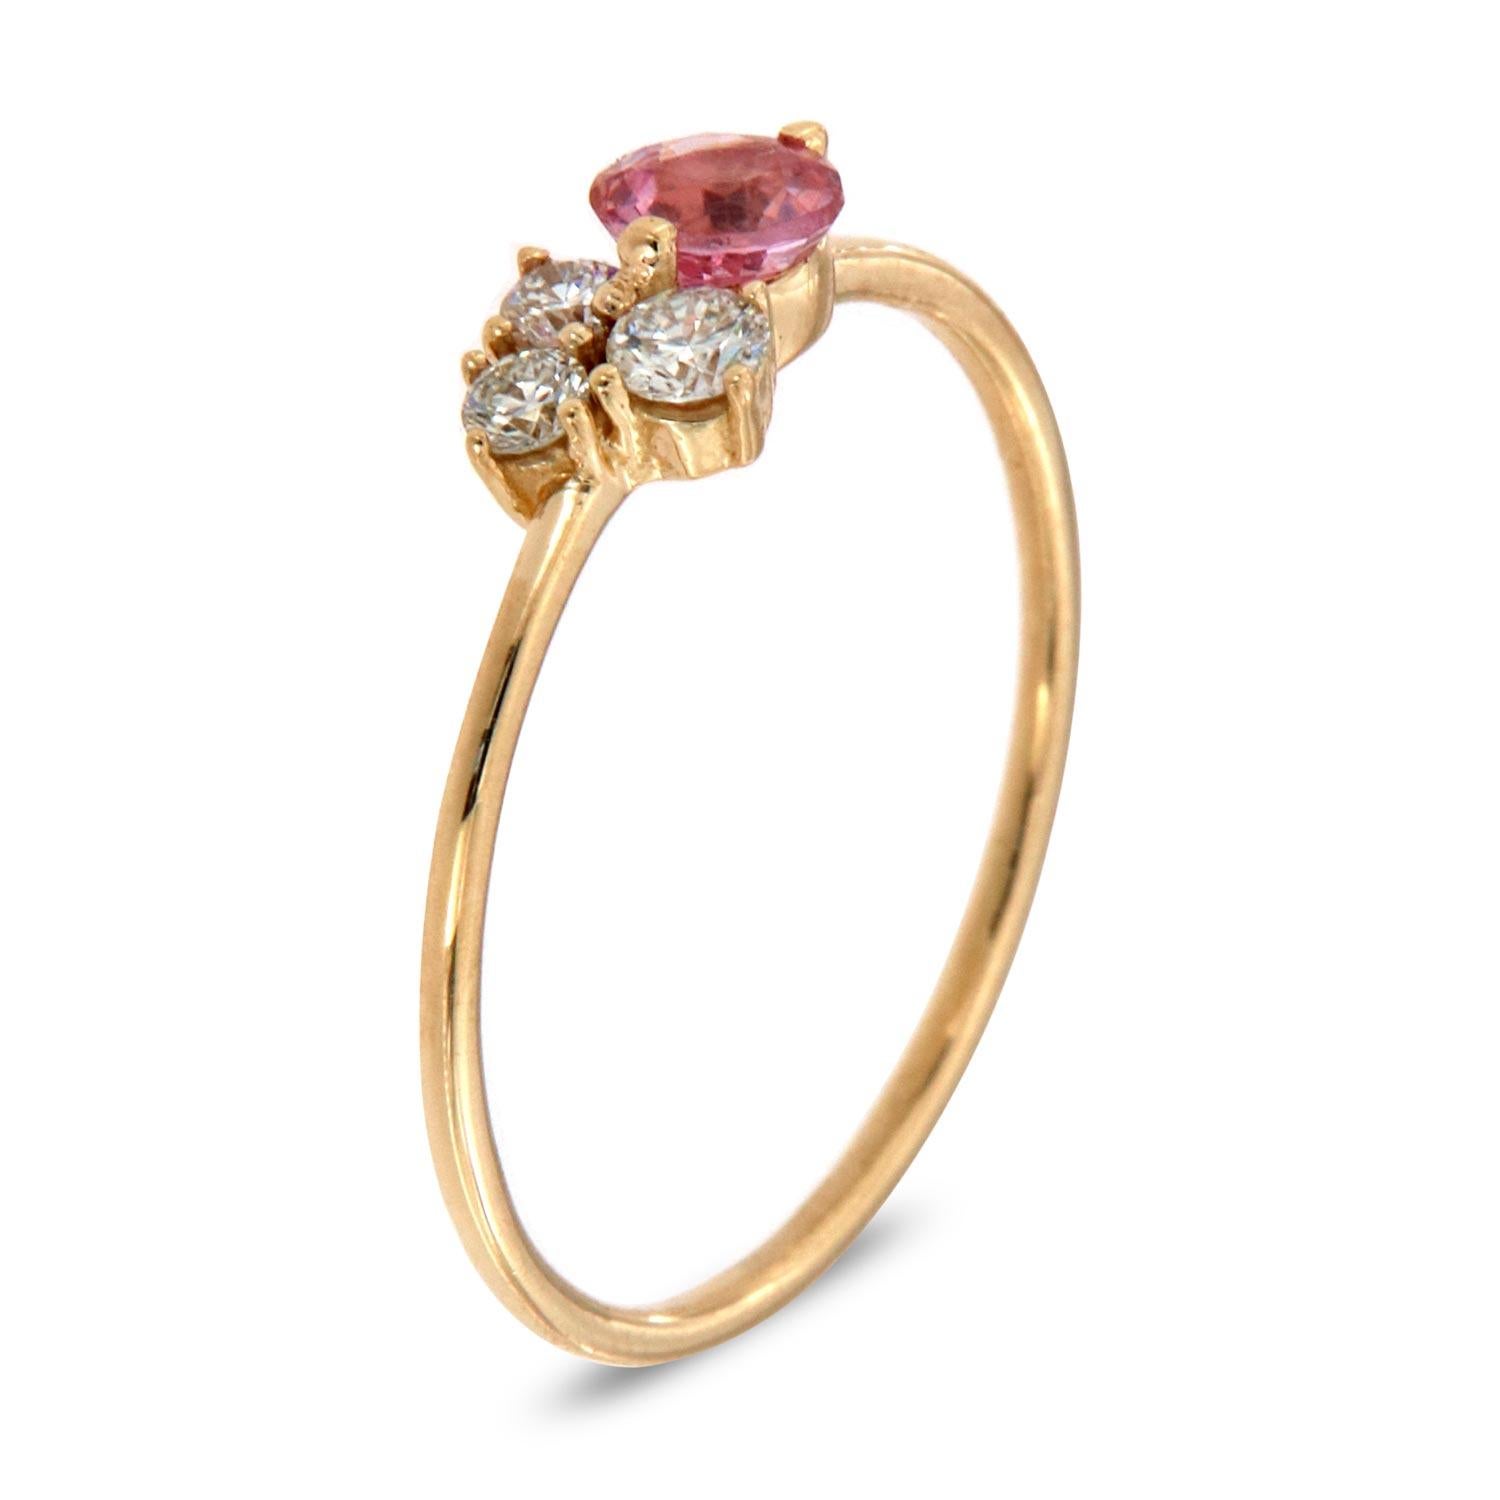 This petite fashion ring is impressive in its vintage appeal, featuring a natural pink round brilliant sapphire, accented with a cluster of round brilliant diamonds. Experience the difference in person!

Product details: 

Center Gemstone Type: